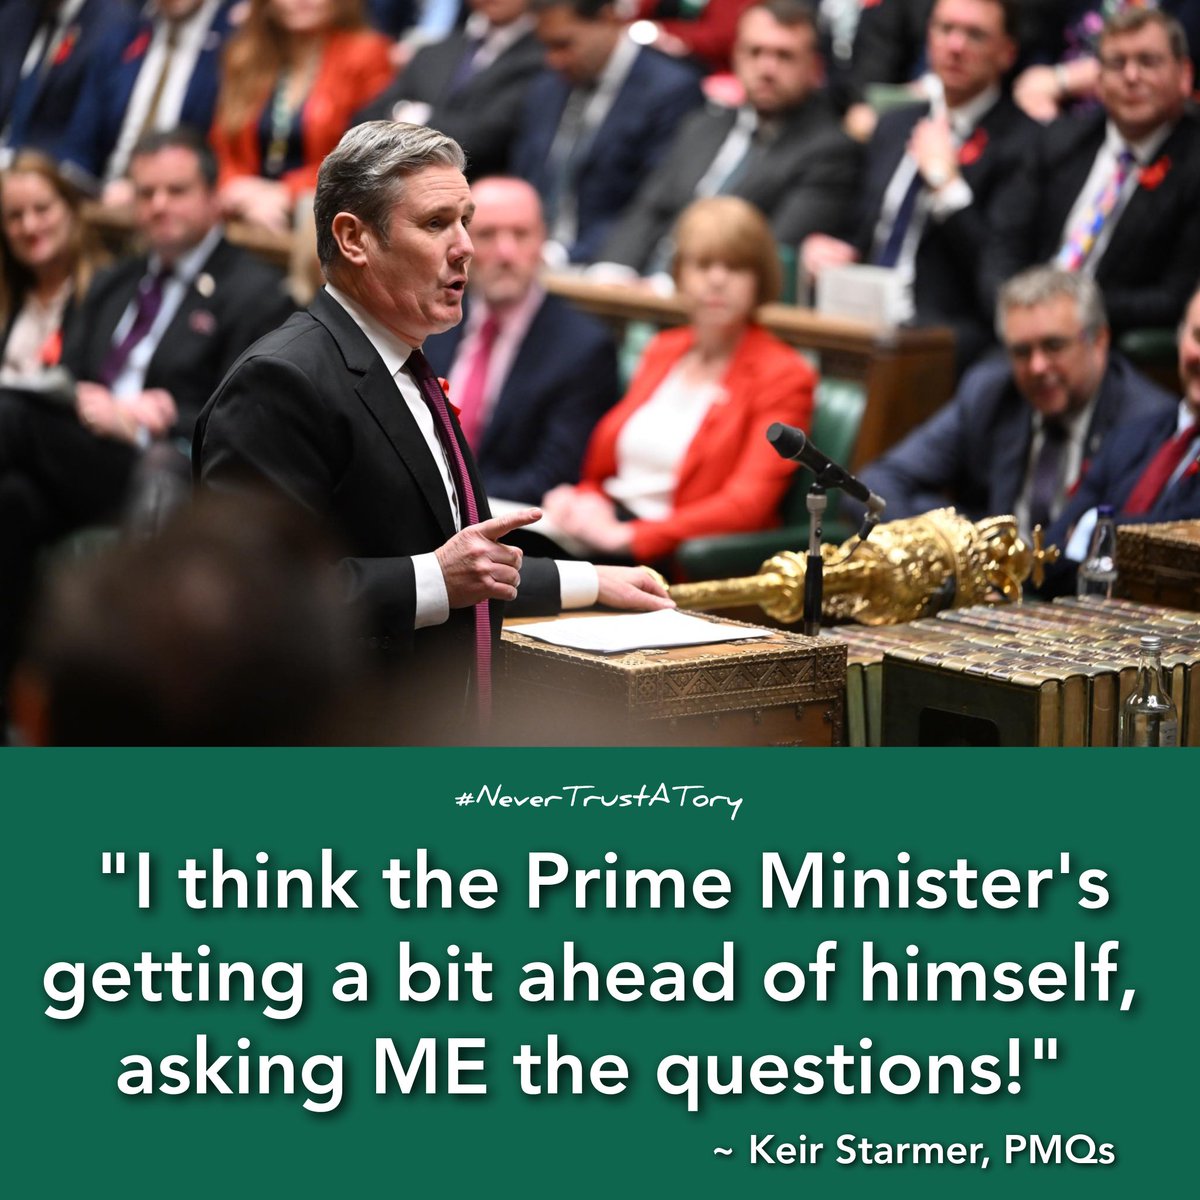 🚨 THIS was absolute GOLD from @Keir_Starmer at #PMQs. 

@RishiSunak has been well and truly rattled today and could only resort to his usual tetchy and snipey responses. 

#NeverTrustATory #ToriesAreToast 
#ToryCriminalsUnfitToGovern 
#ToryBrokenBritain 
#GeneralElectionN0W